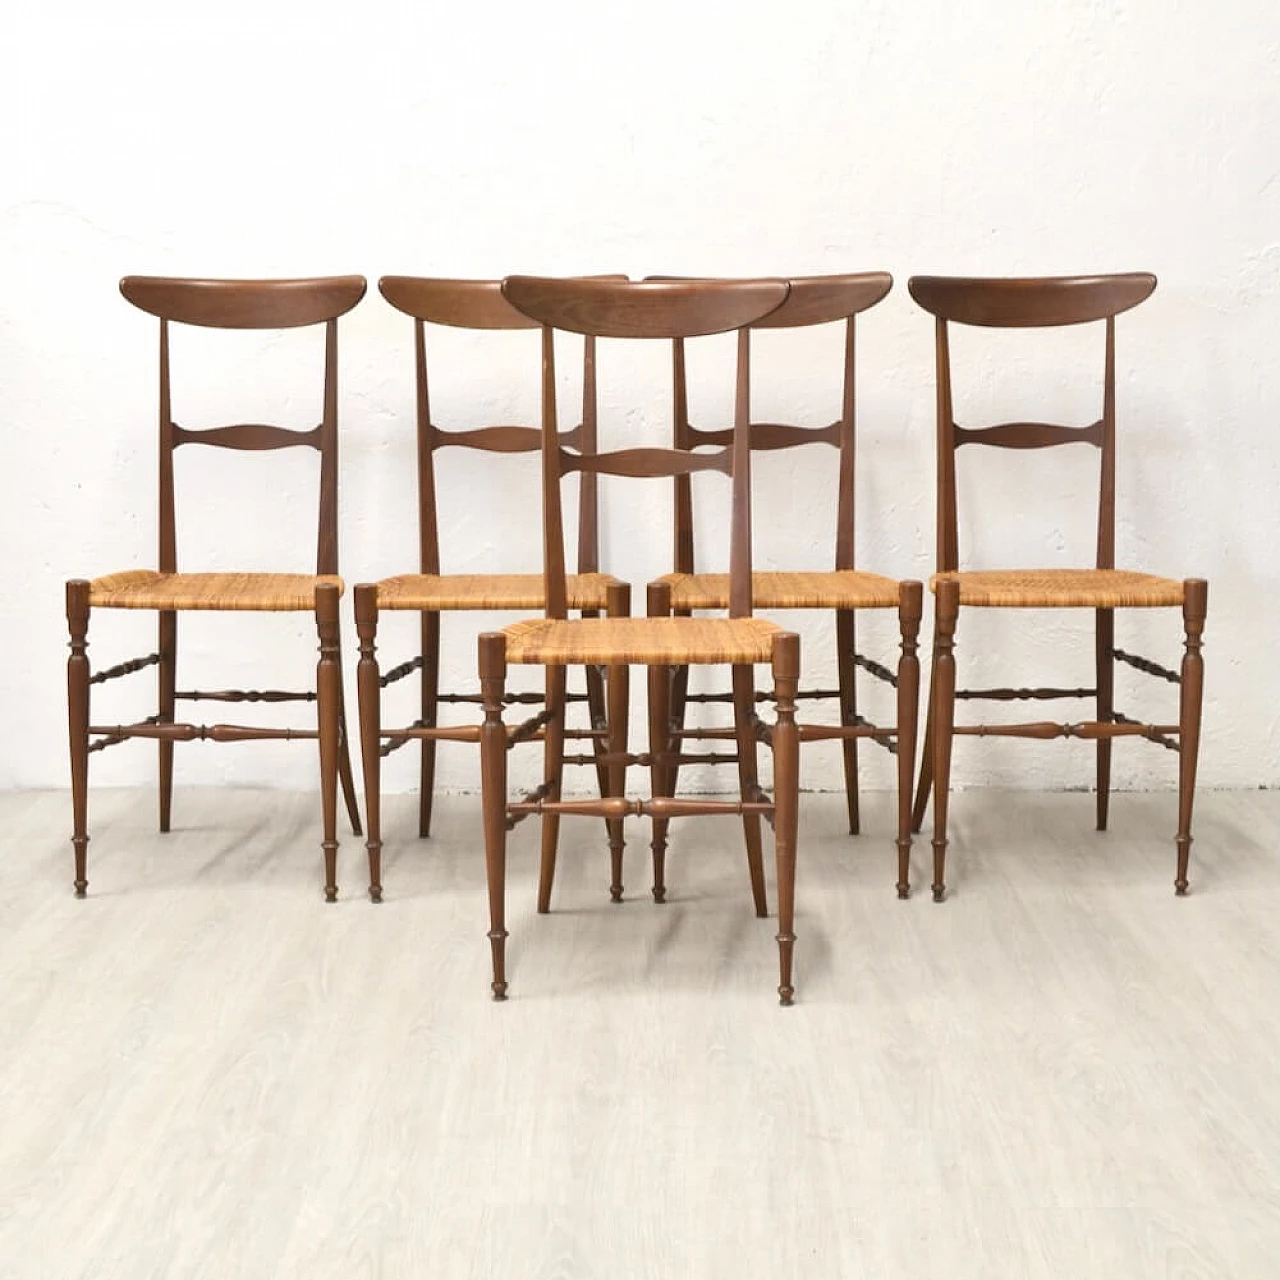 5 Chiavari chairs in wood and woven straw, 1950s 2